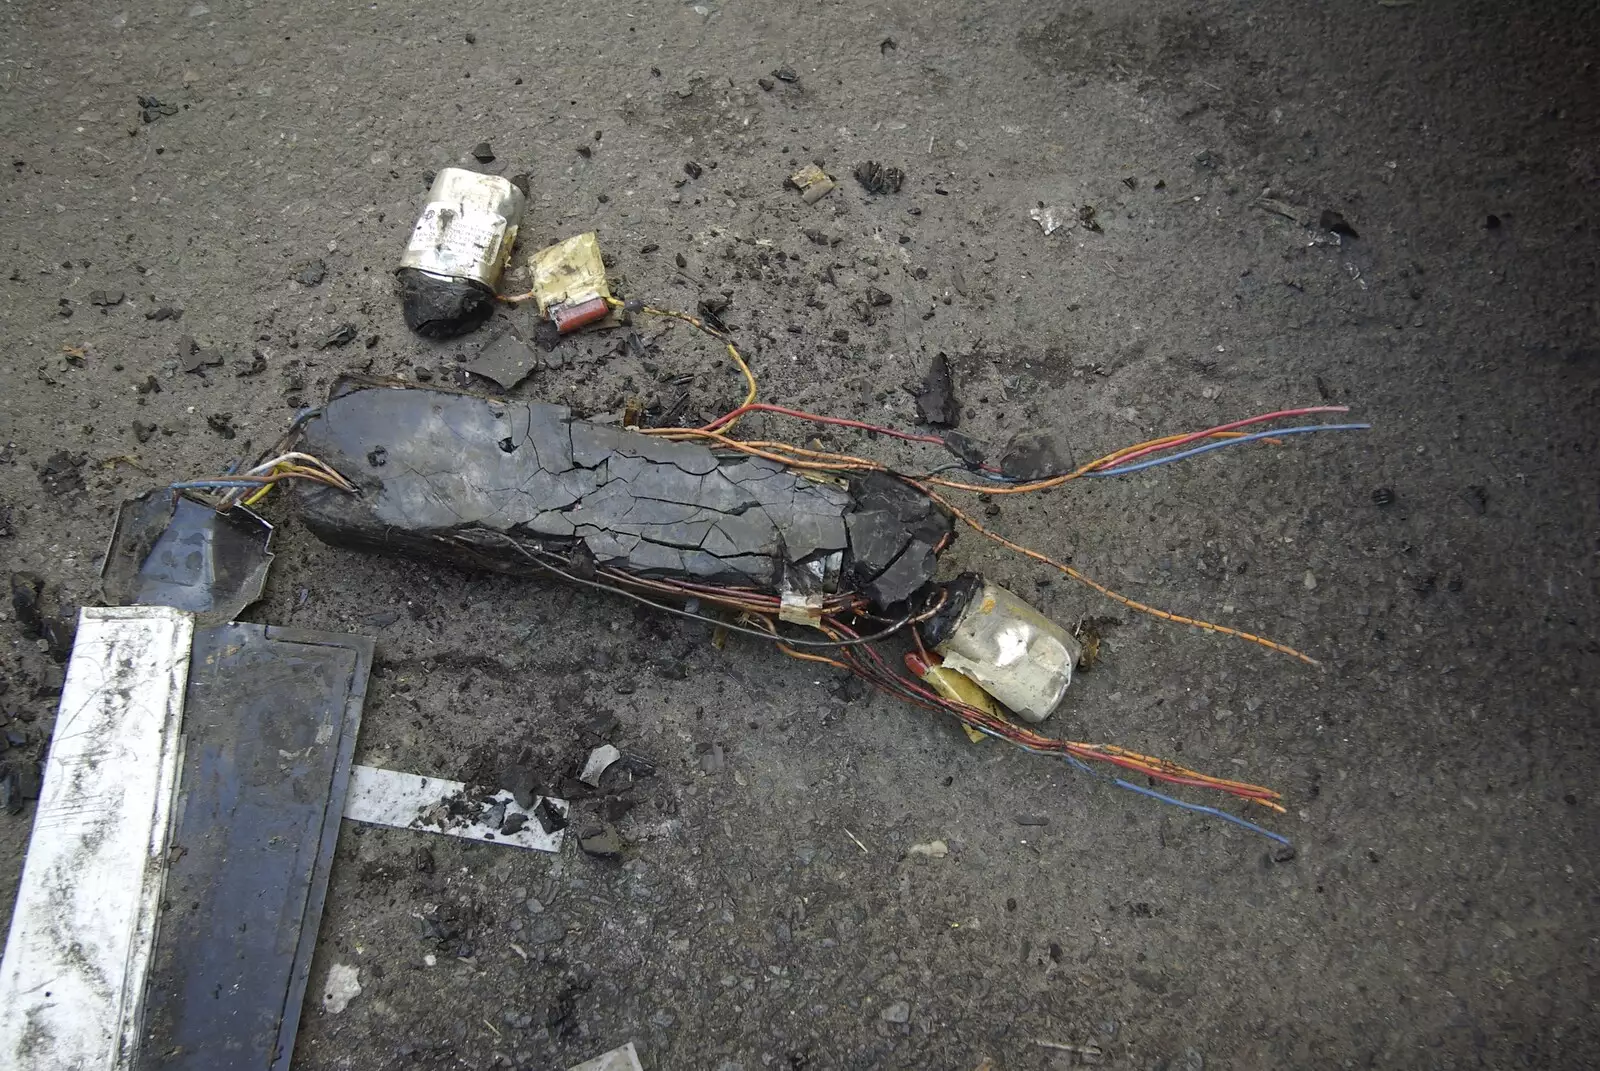 Some sort of broken electrical gear on the street, from Persian Day Parade, Upper East Side and Midtown, New York, US - 25th March 2007